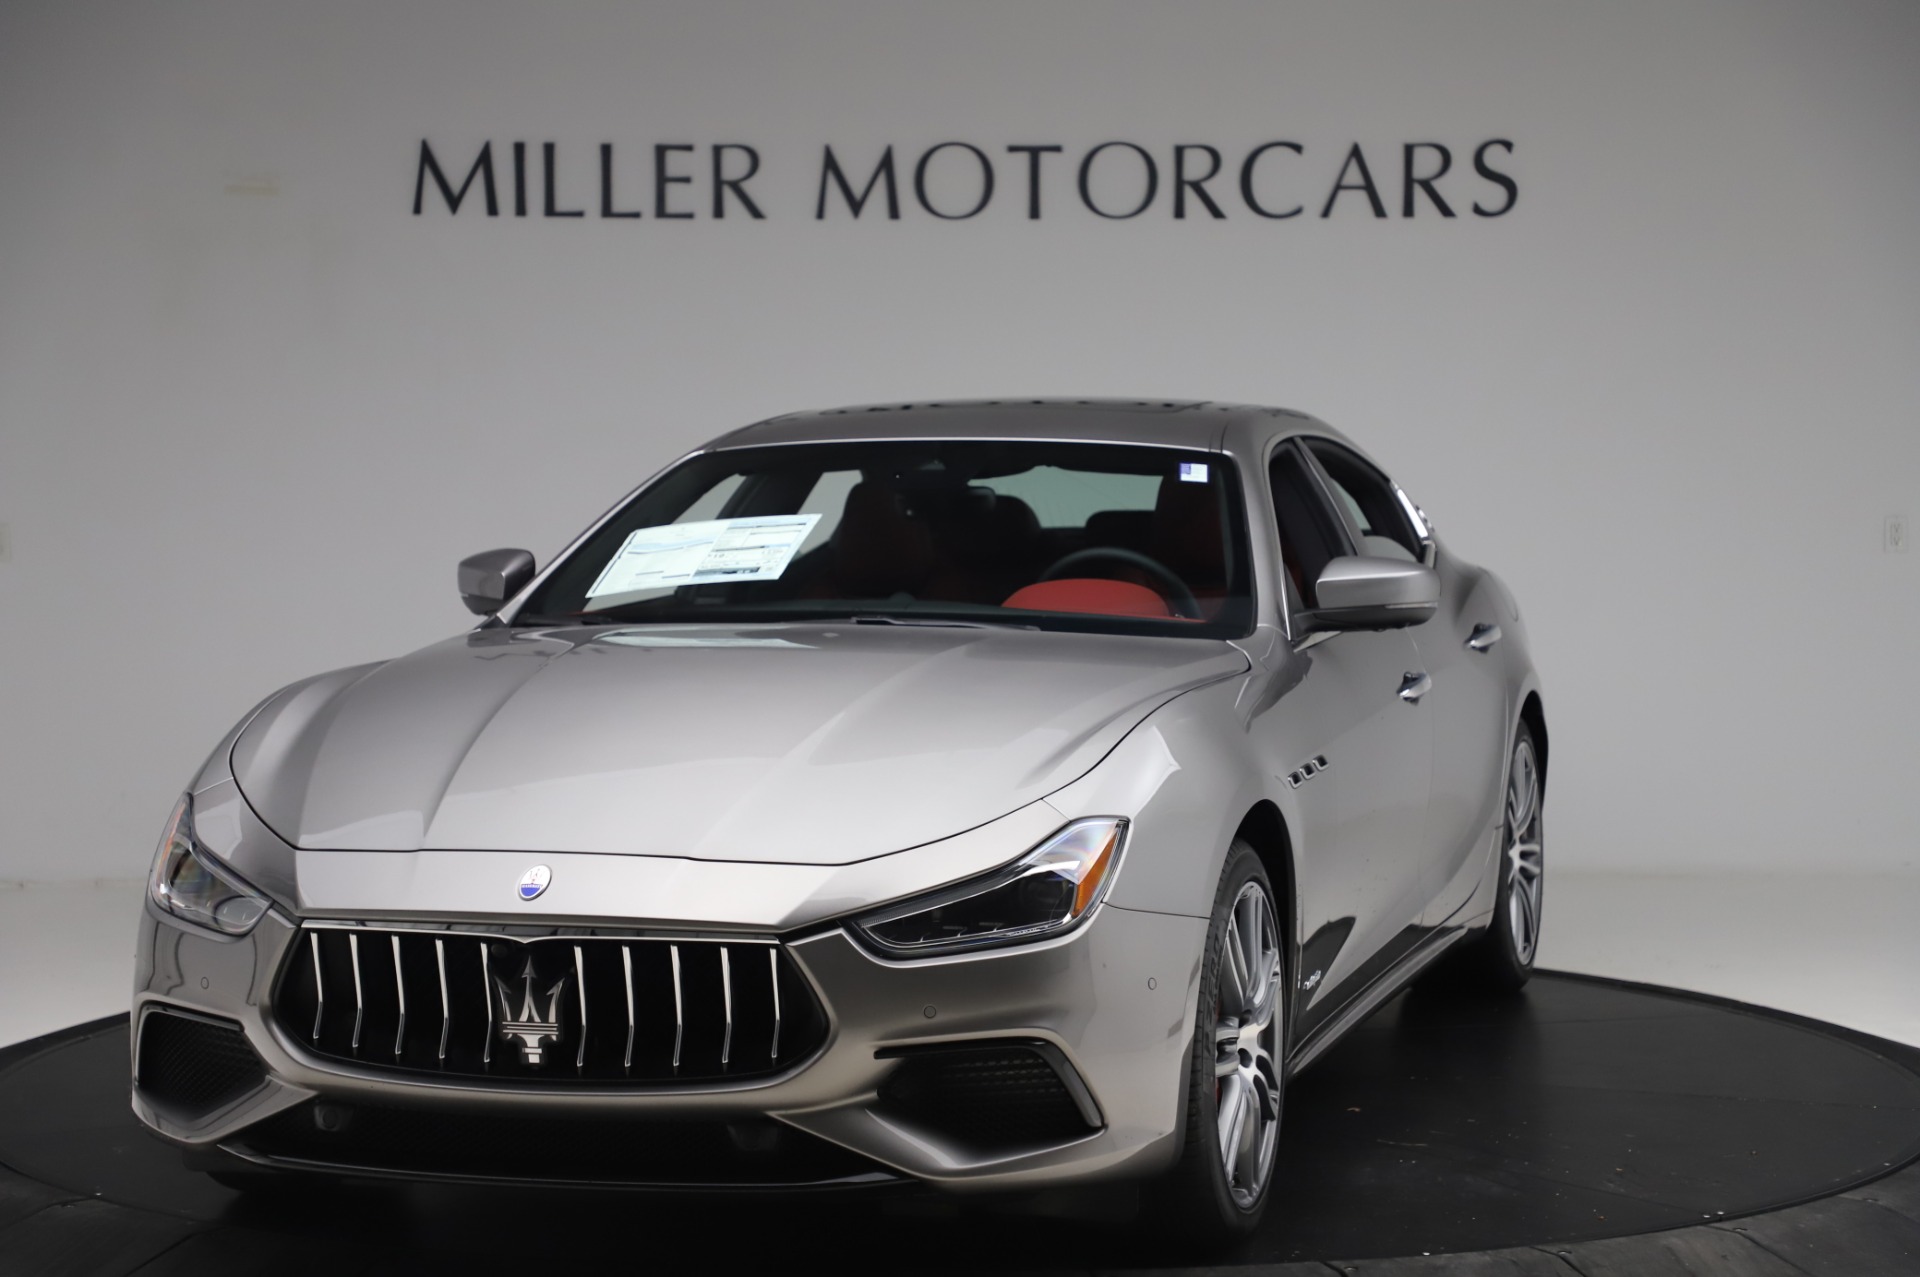 New 2020 Maserati Ghibli S Q4 GranSport for sale Sold at McLaren Greenwich in Greenwich CT 06830 1